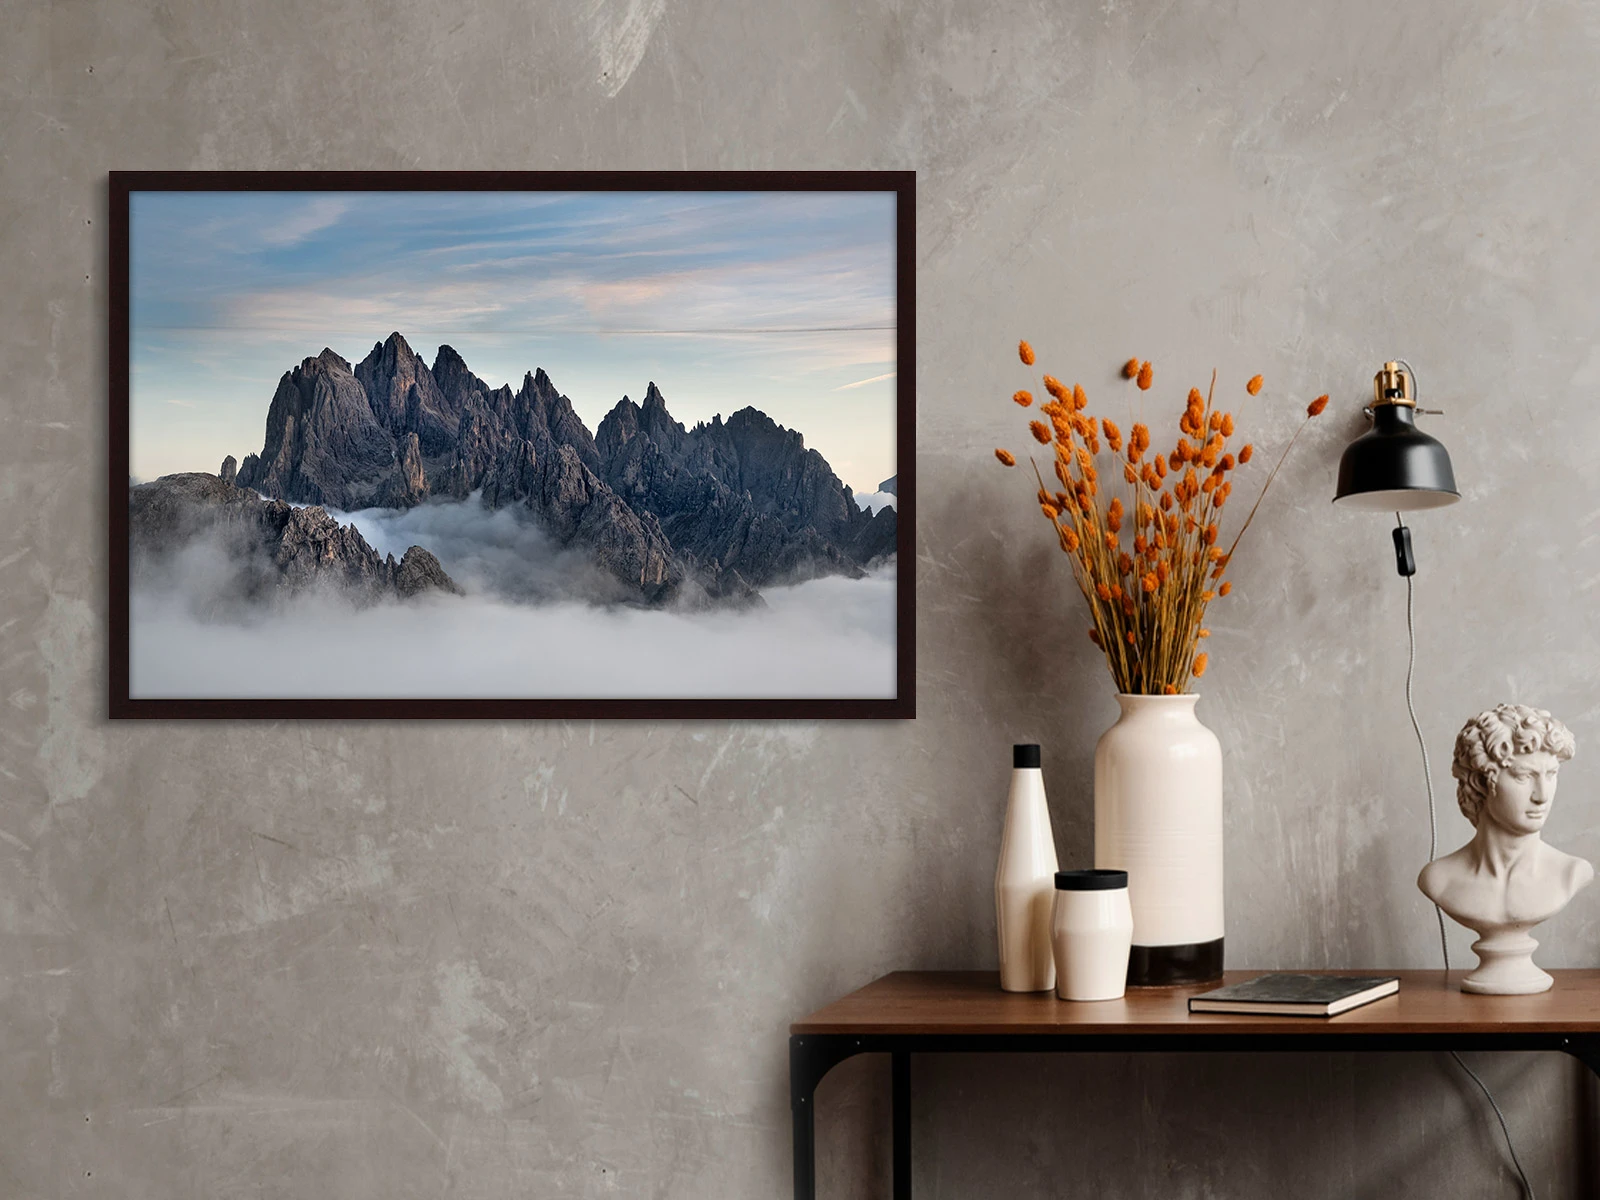 Overcast cloud in a mountain range in a Gallery Frame on a wall in a living room.